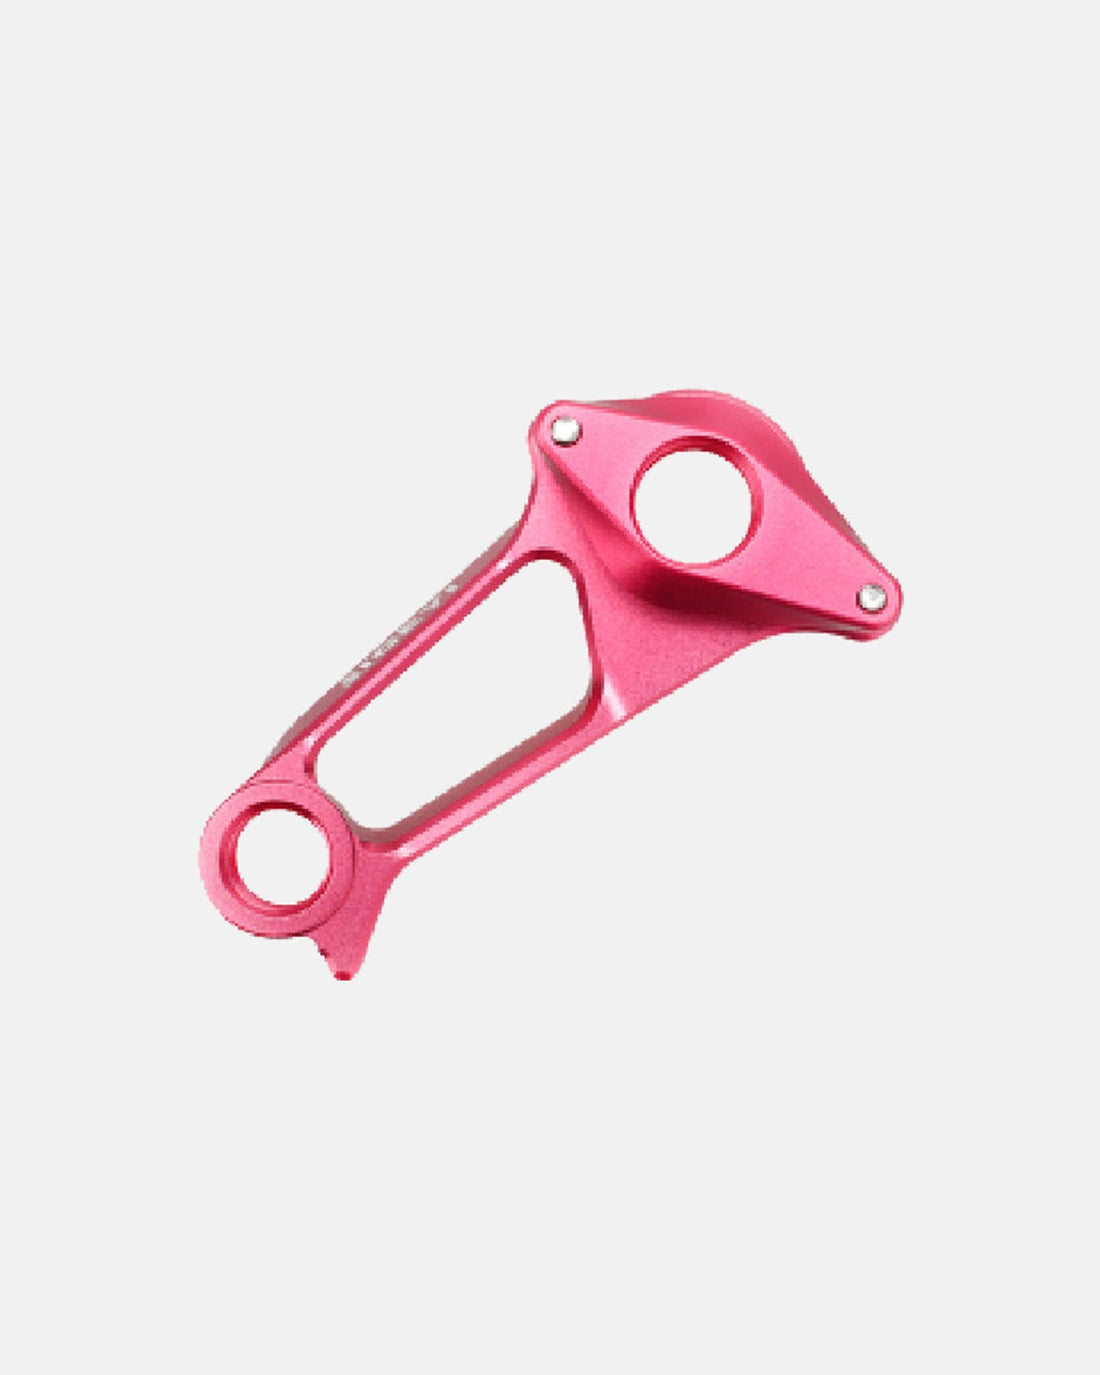 Sigeyi Cannondale Direct-Mount Disc Hanger - Pink - Sigeyi